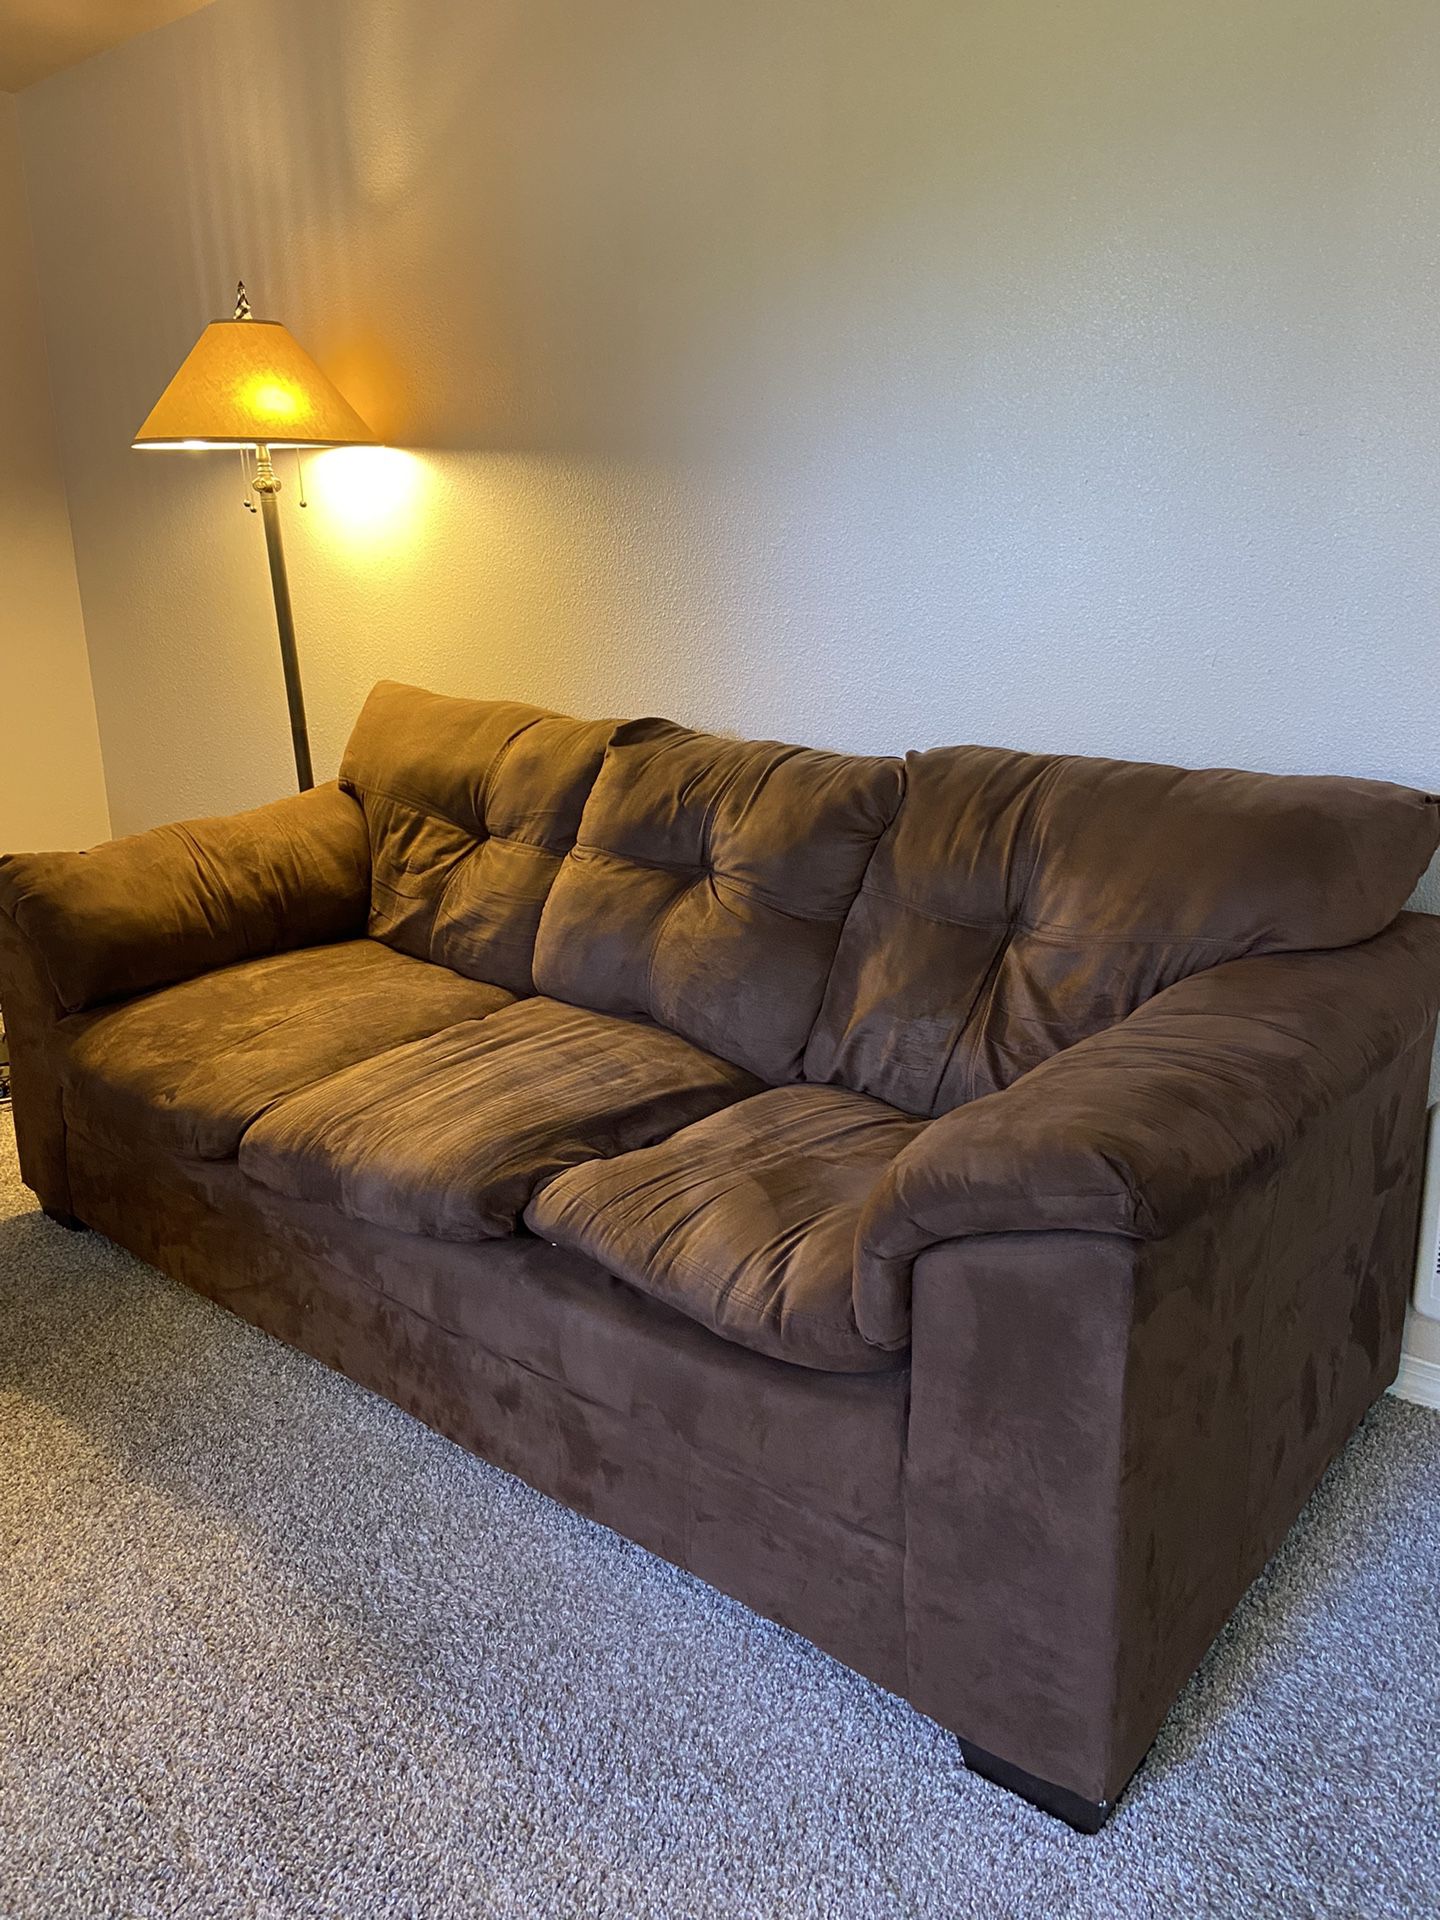 Free Couch Set